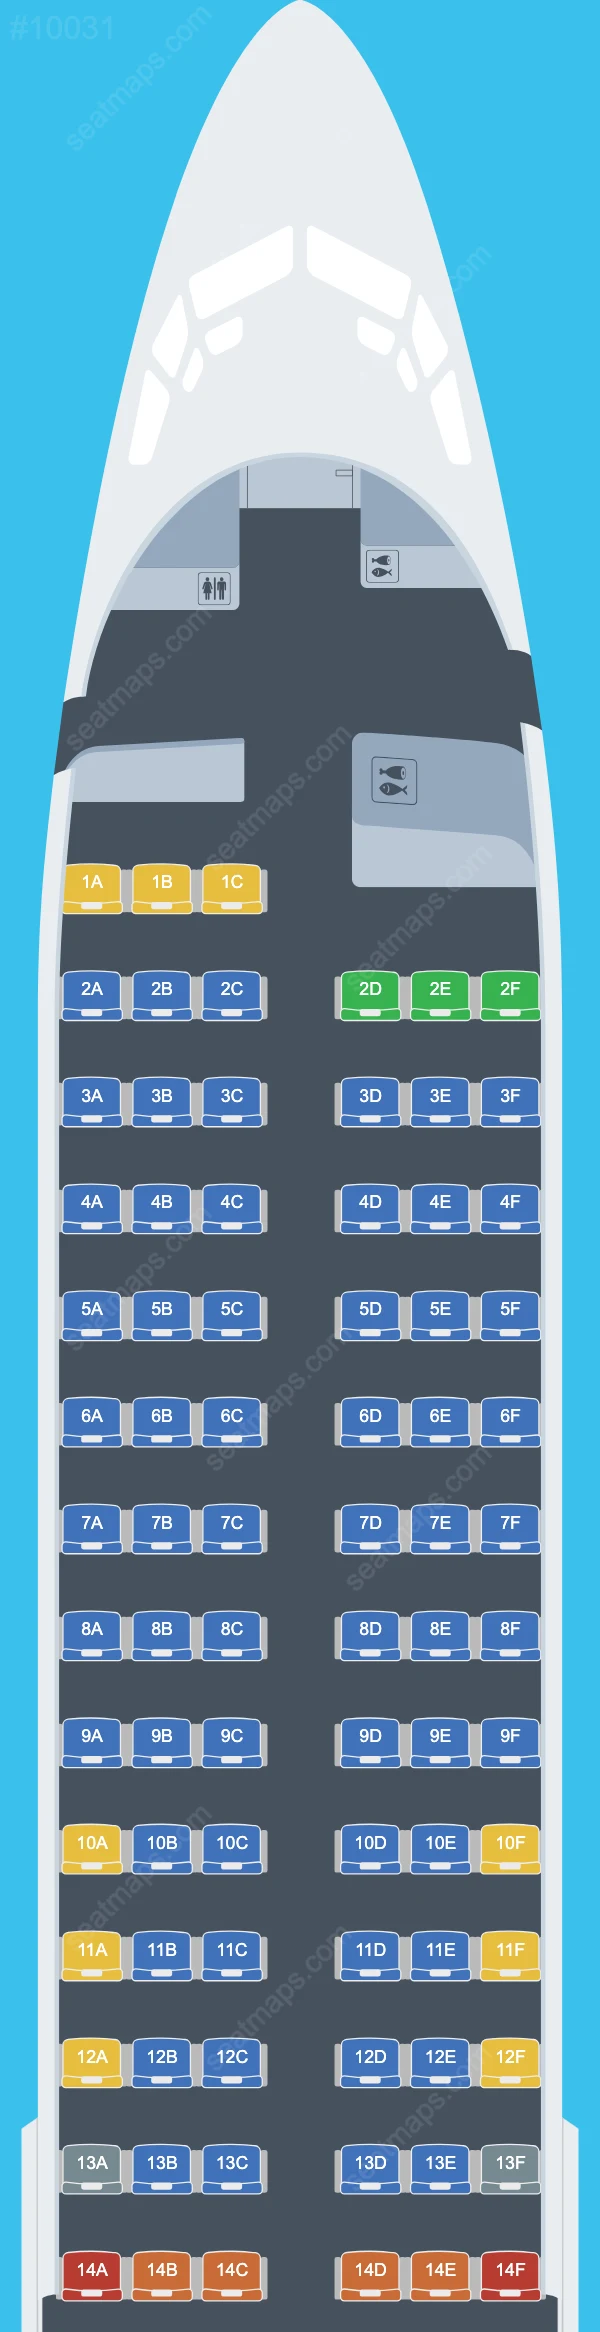 Bees Airline Boeing 737-800 seatmap mobile preview